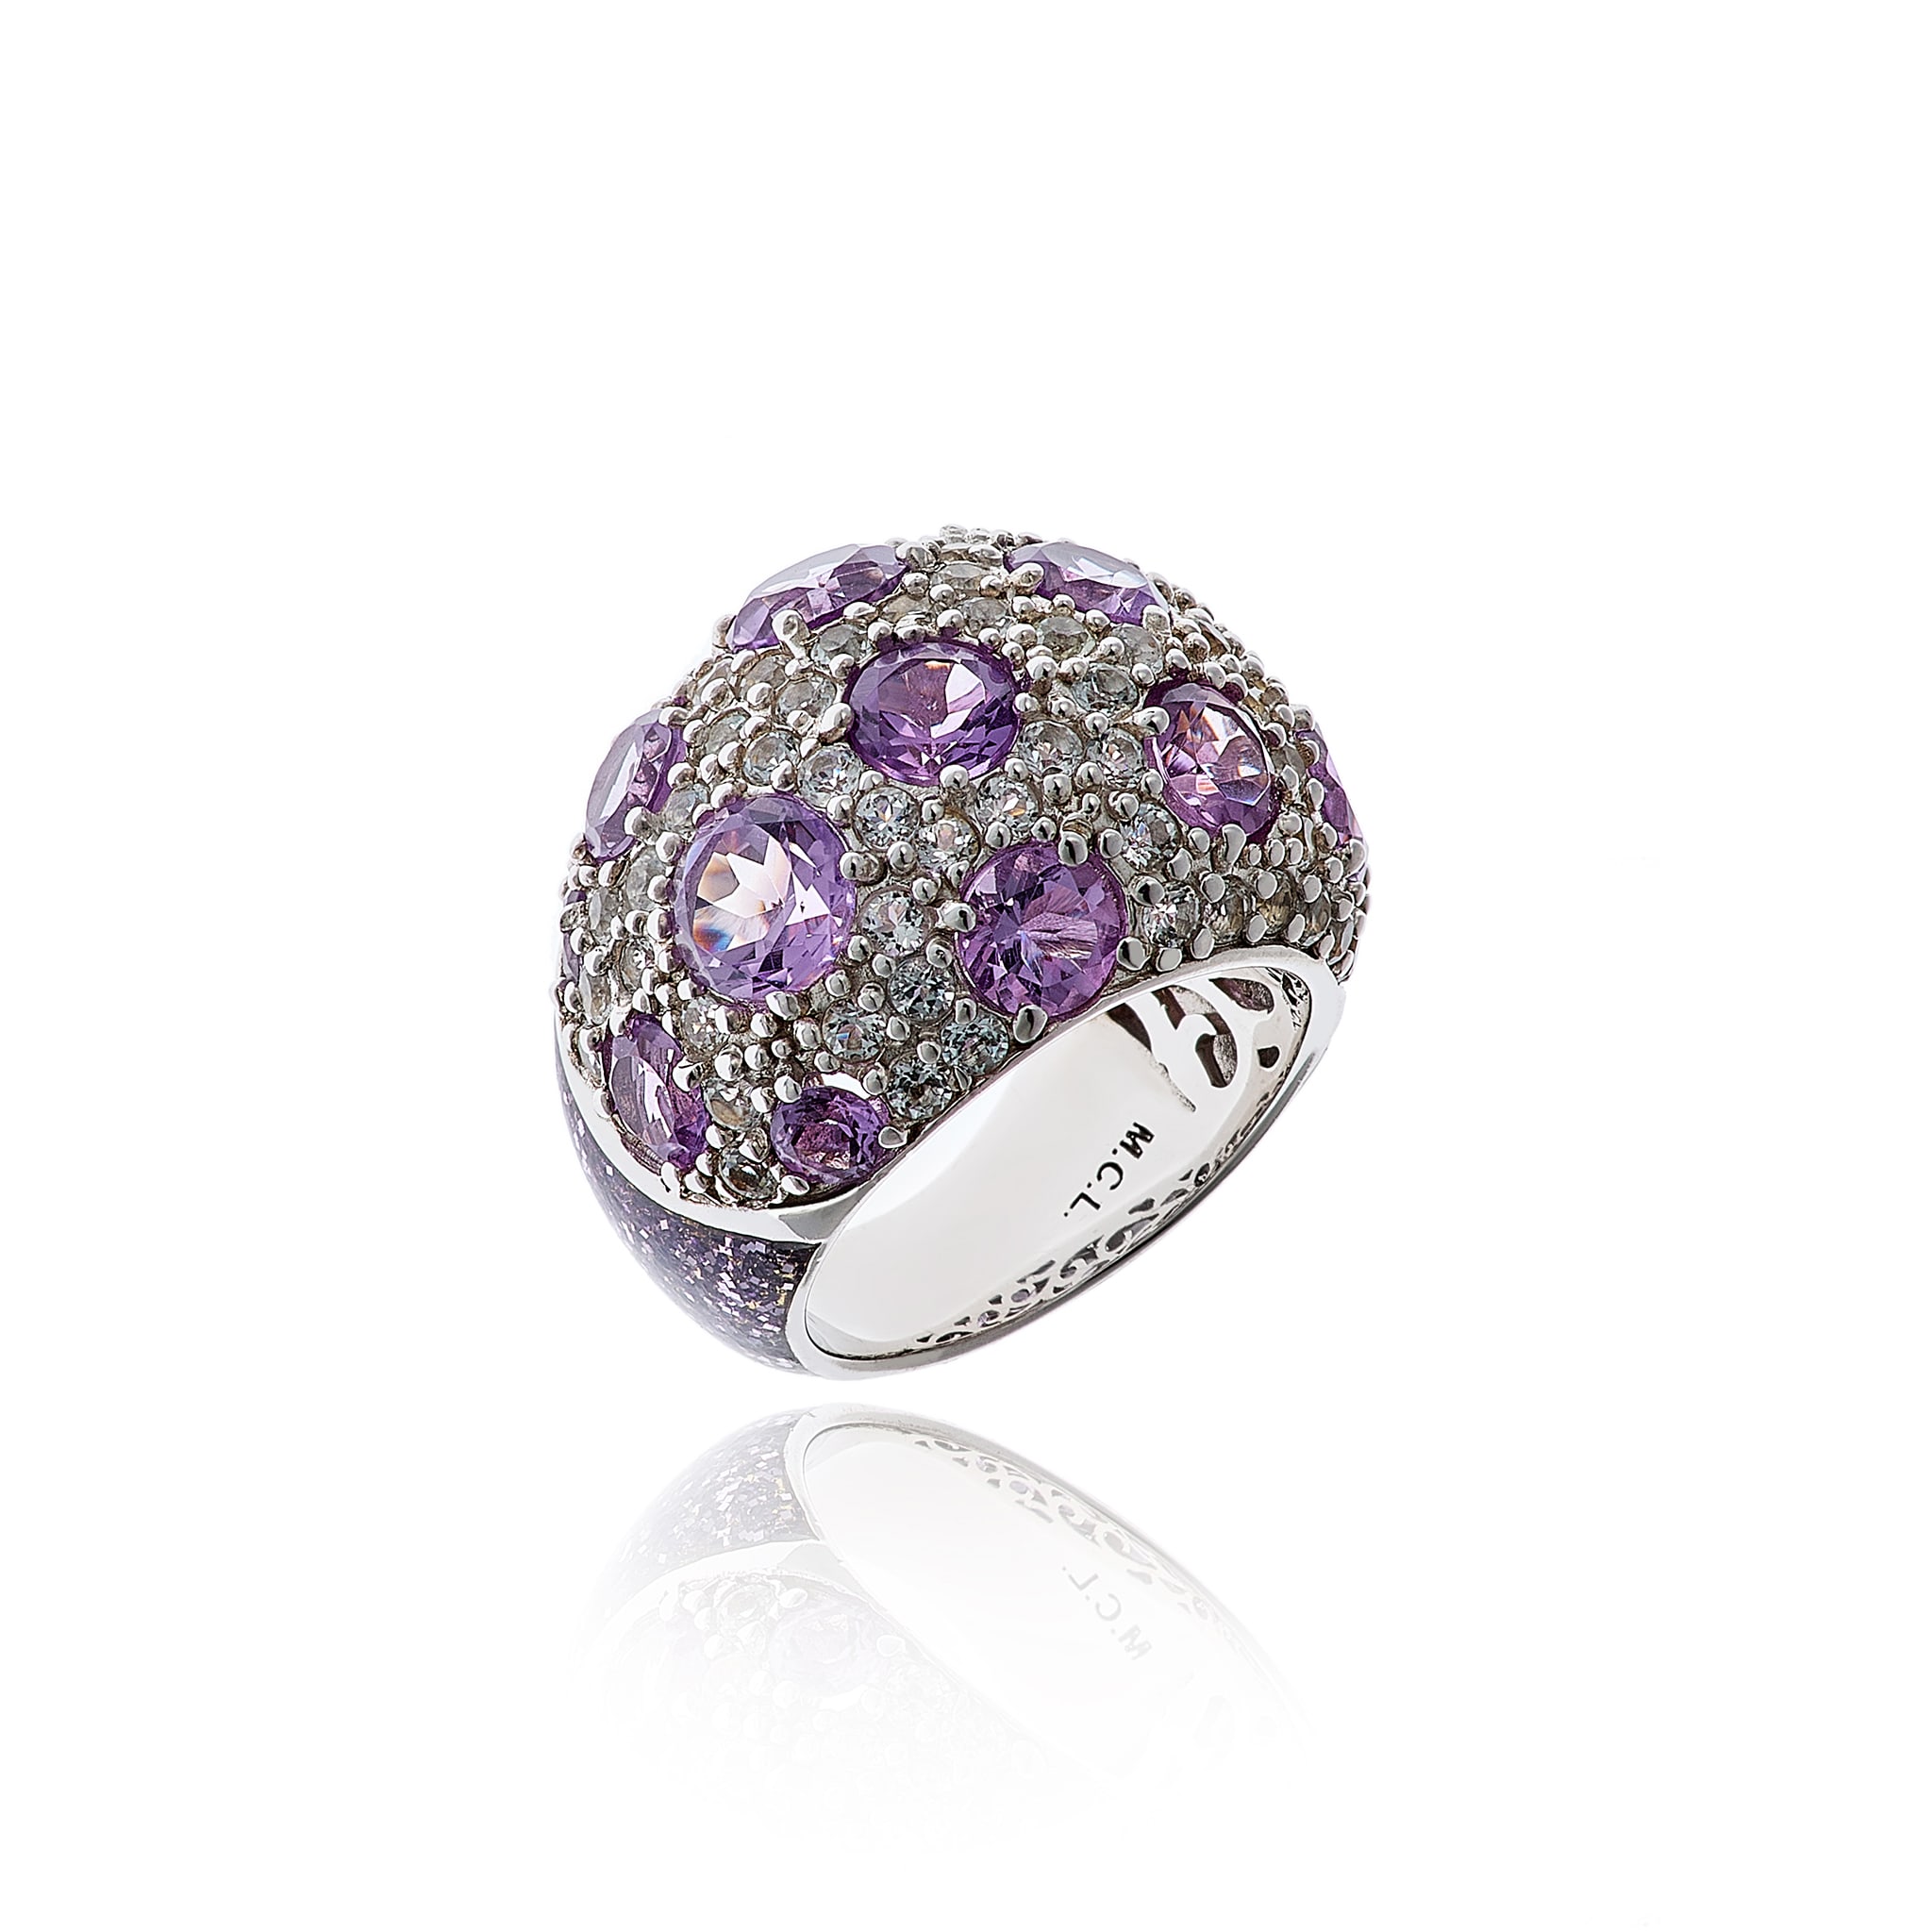 MCL Design White Rhodium Plated Sterling Silver Statement Ring with Light Purple Glitter Enamel, White Topaz & Amethysts